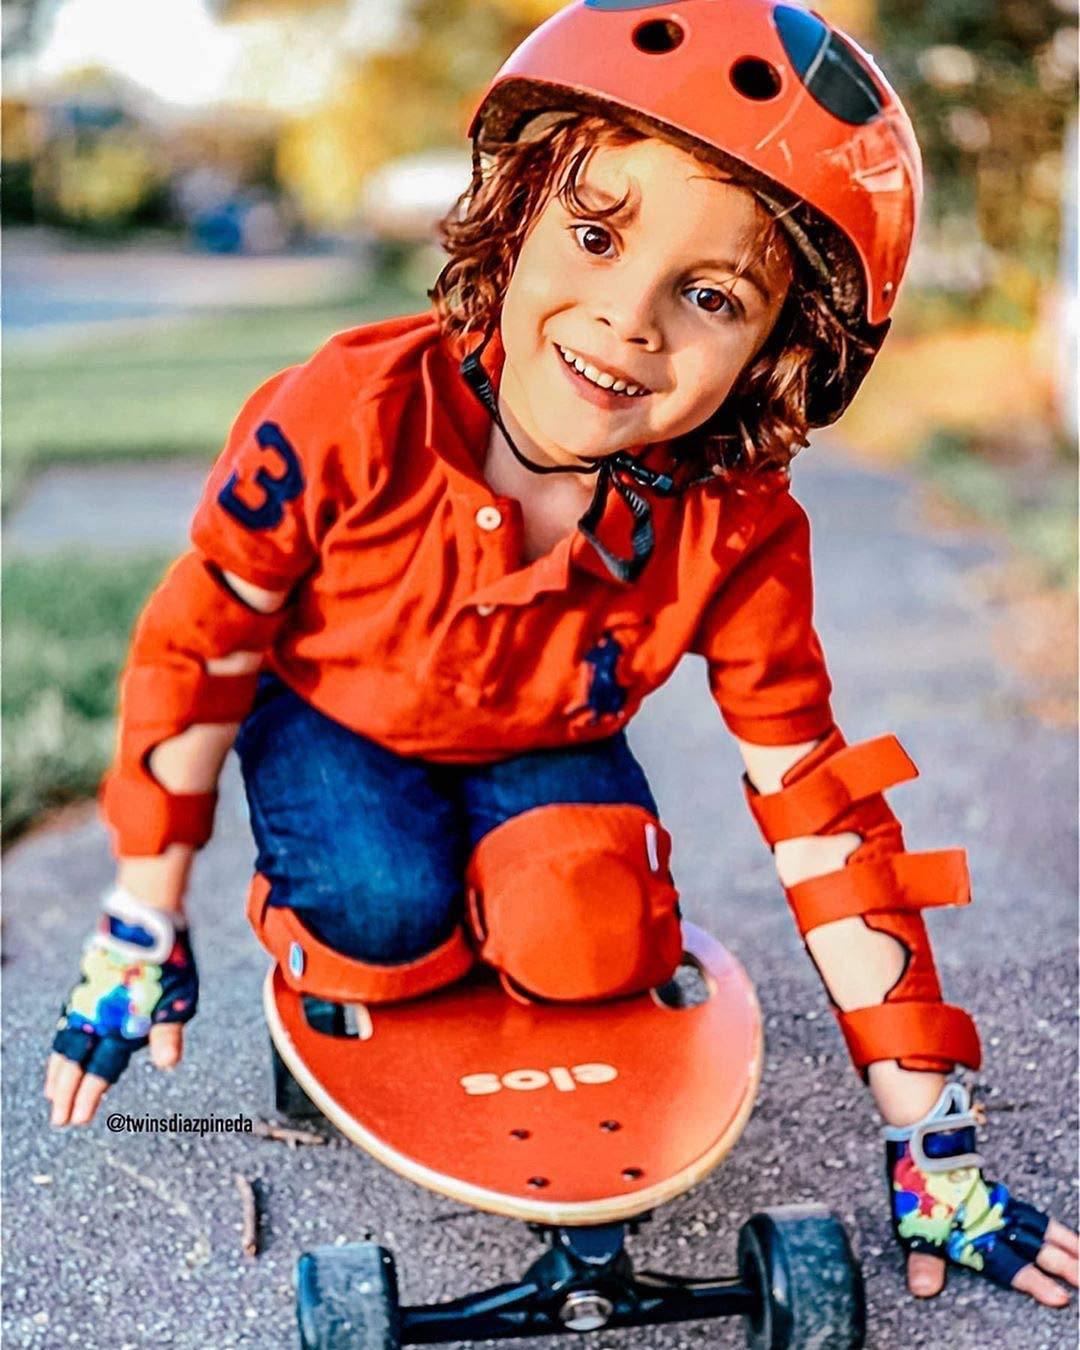 [1st Gen.] Innovative Soft Kids Elbow and Knee Pads with Bike Gloves (Pure Red)